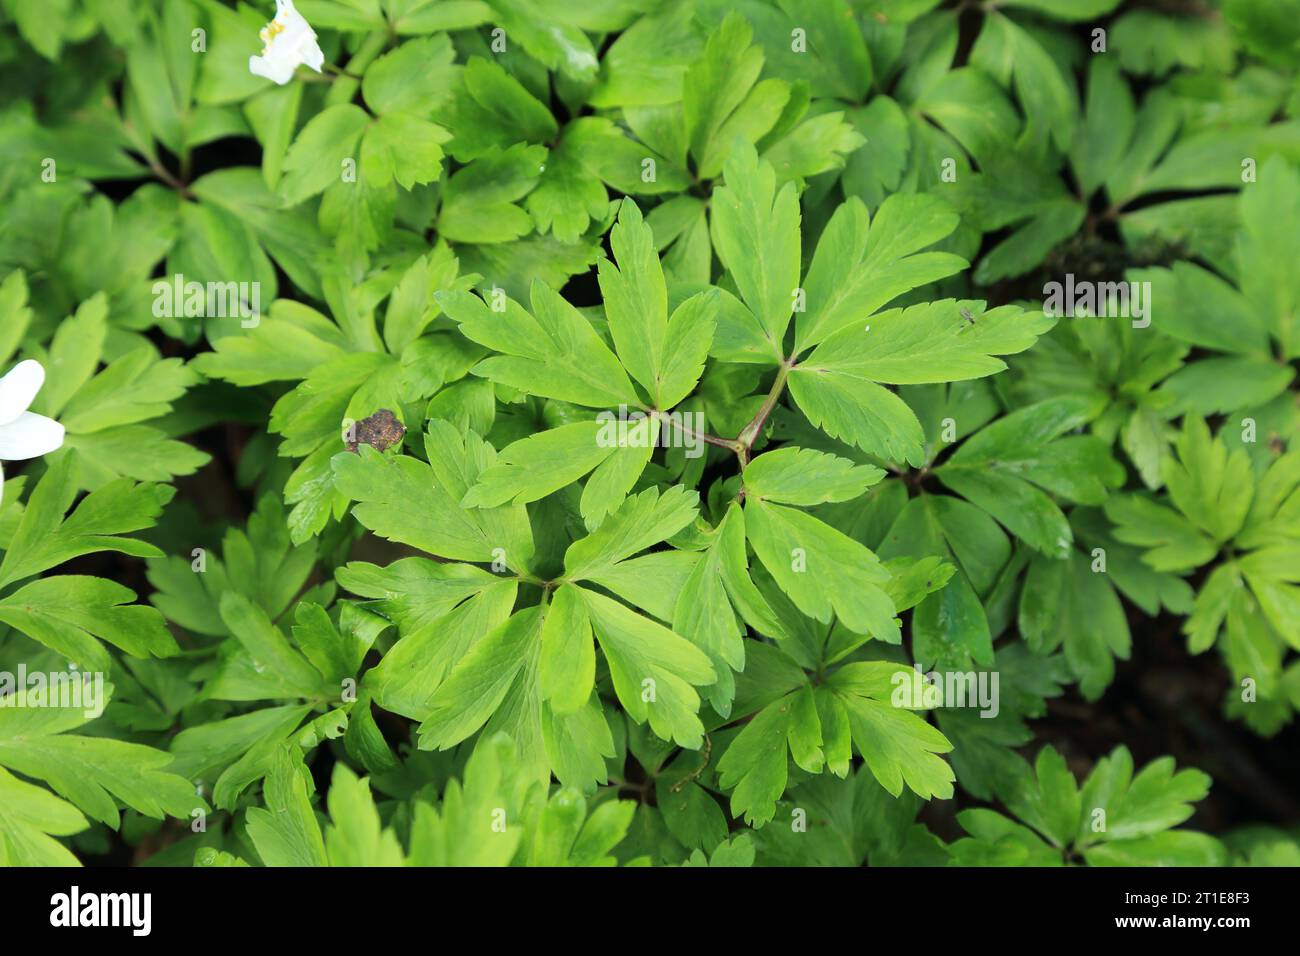 Green leaves of wood anemone on woodland floor in ancient woodland at Spong Woods, Elmsted, Ashford, Kent, England, United Kingdom Stock Photo